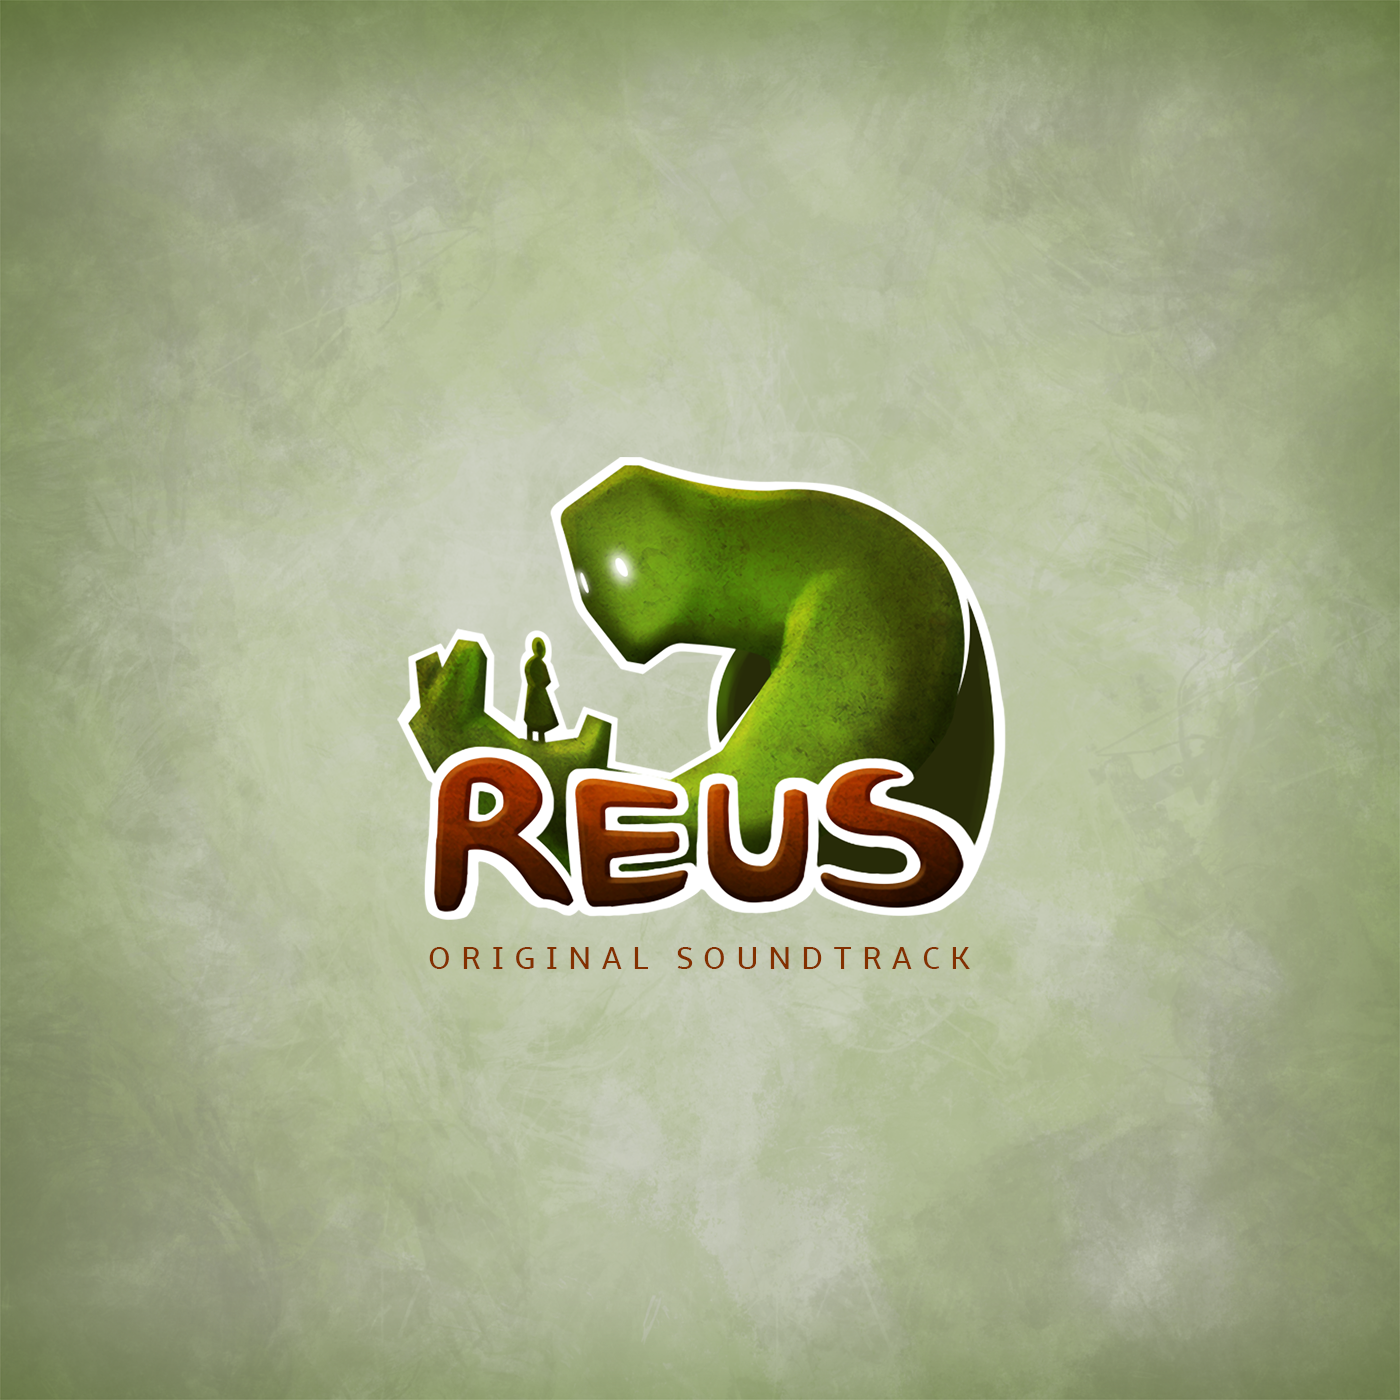 Reus - Original Soundtrack now available! And a Daily Deal! reviews